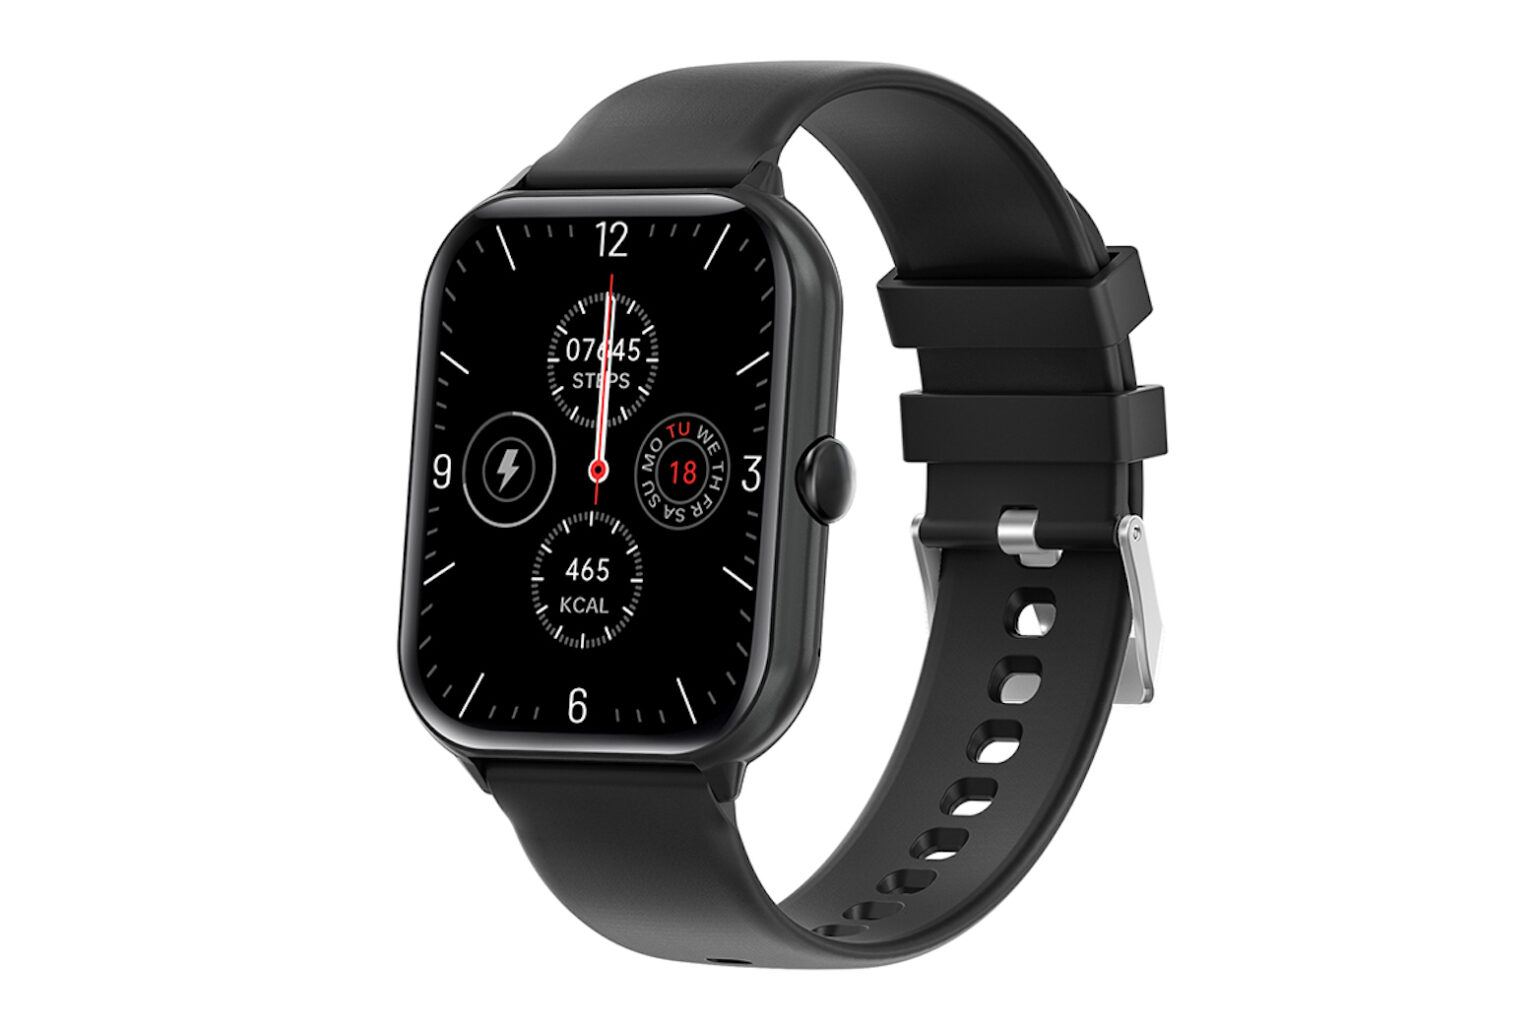 This Apple Watch alternative is on sale for $39.99.